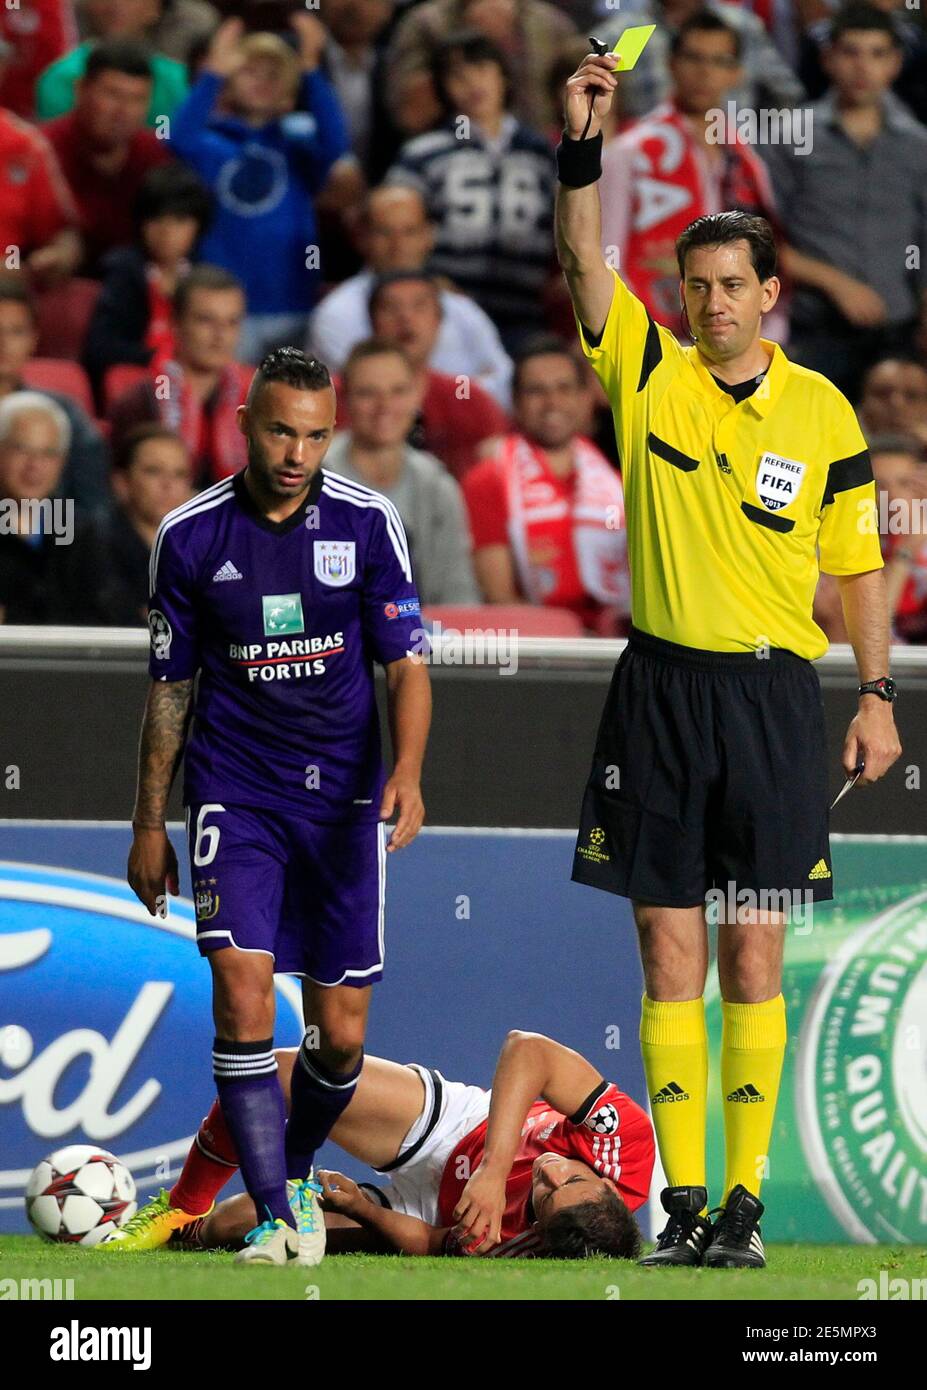 Referee Manuel Grafe R Of Germany Shows A Yellow Card To Anderlecht S Demy De Zeeuw L As Benfica S Filip Djuricic Lies On The Ground During Their Champions League Soccer Match At The